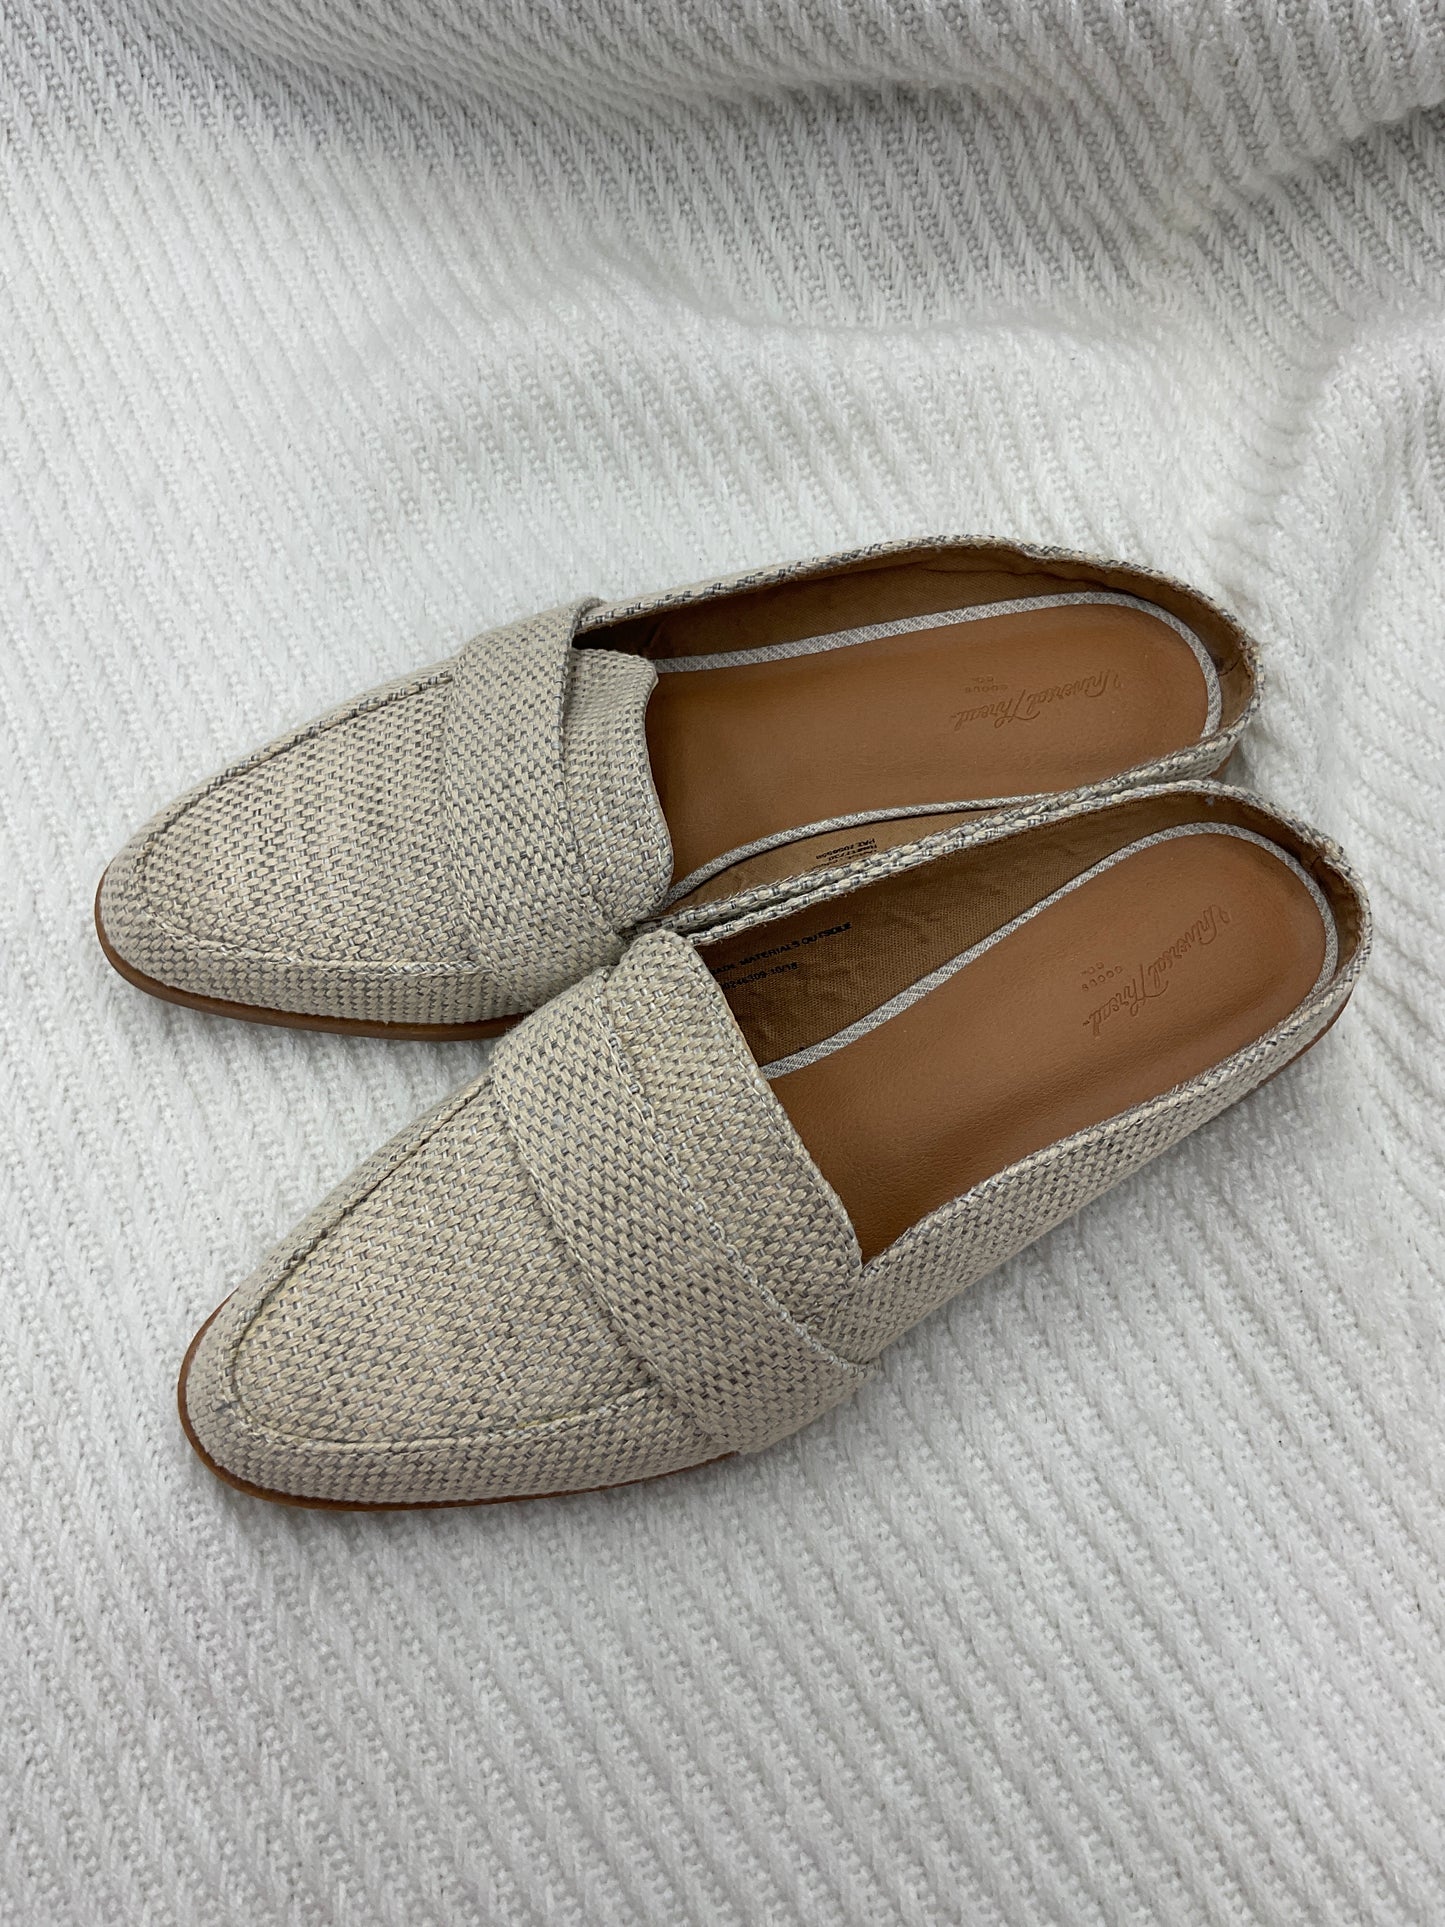 Shoes Flats By Universal Thread  Size: 6